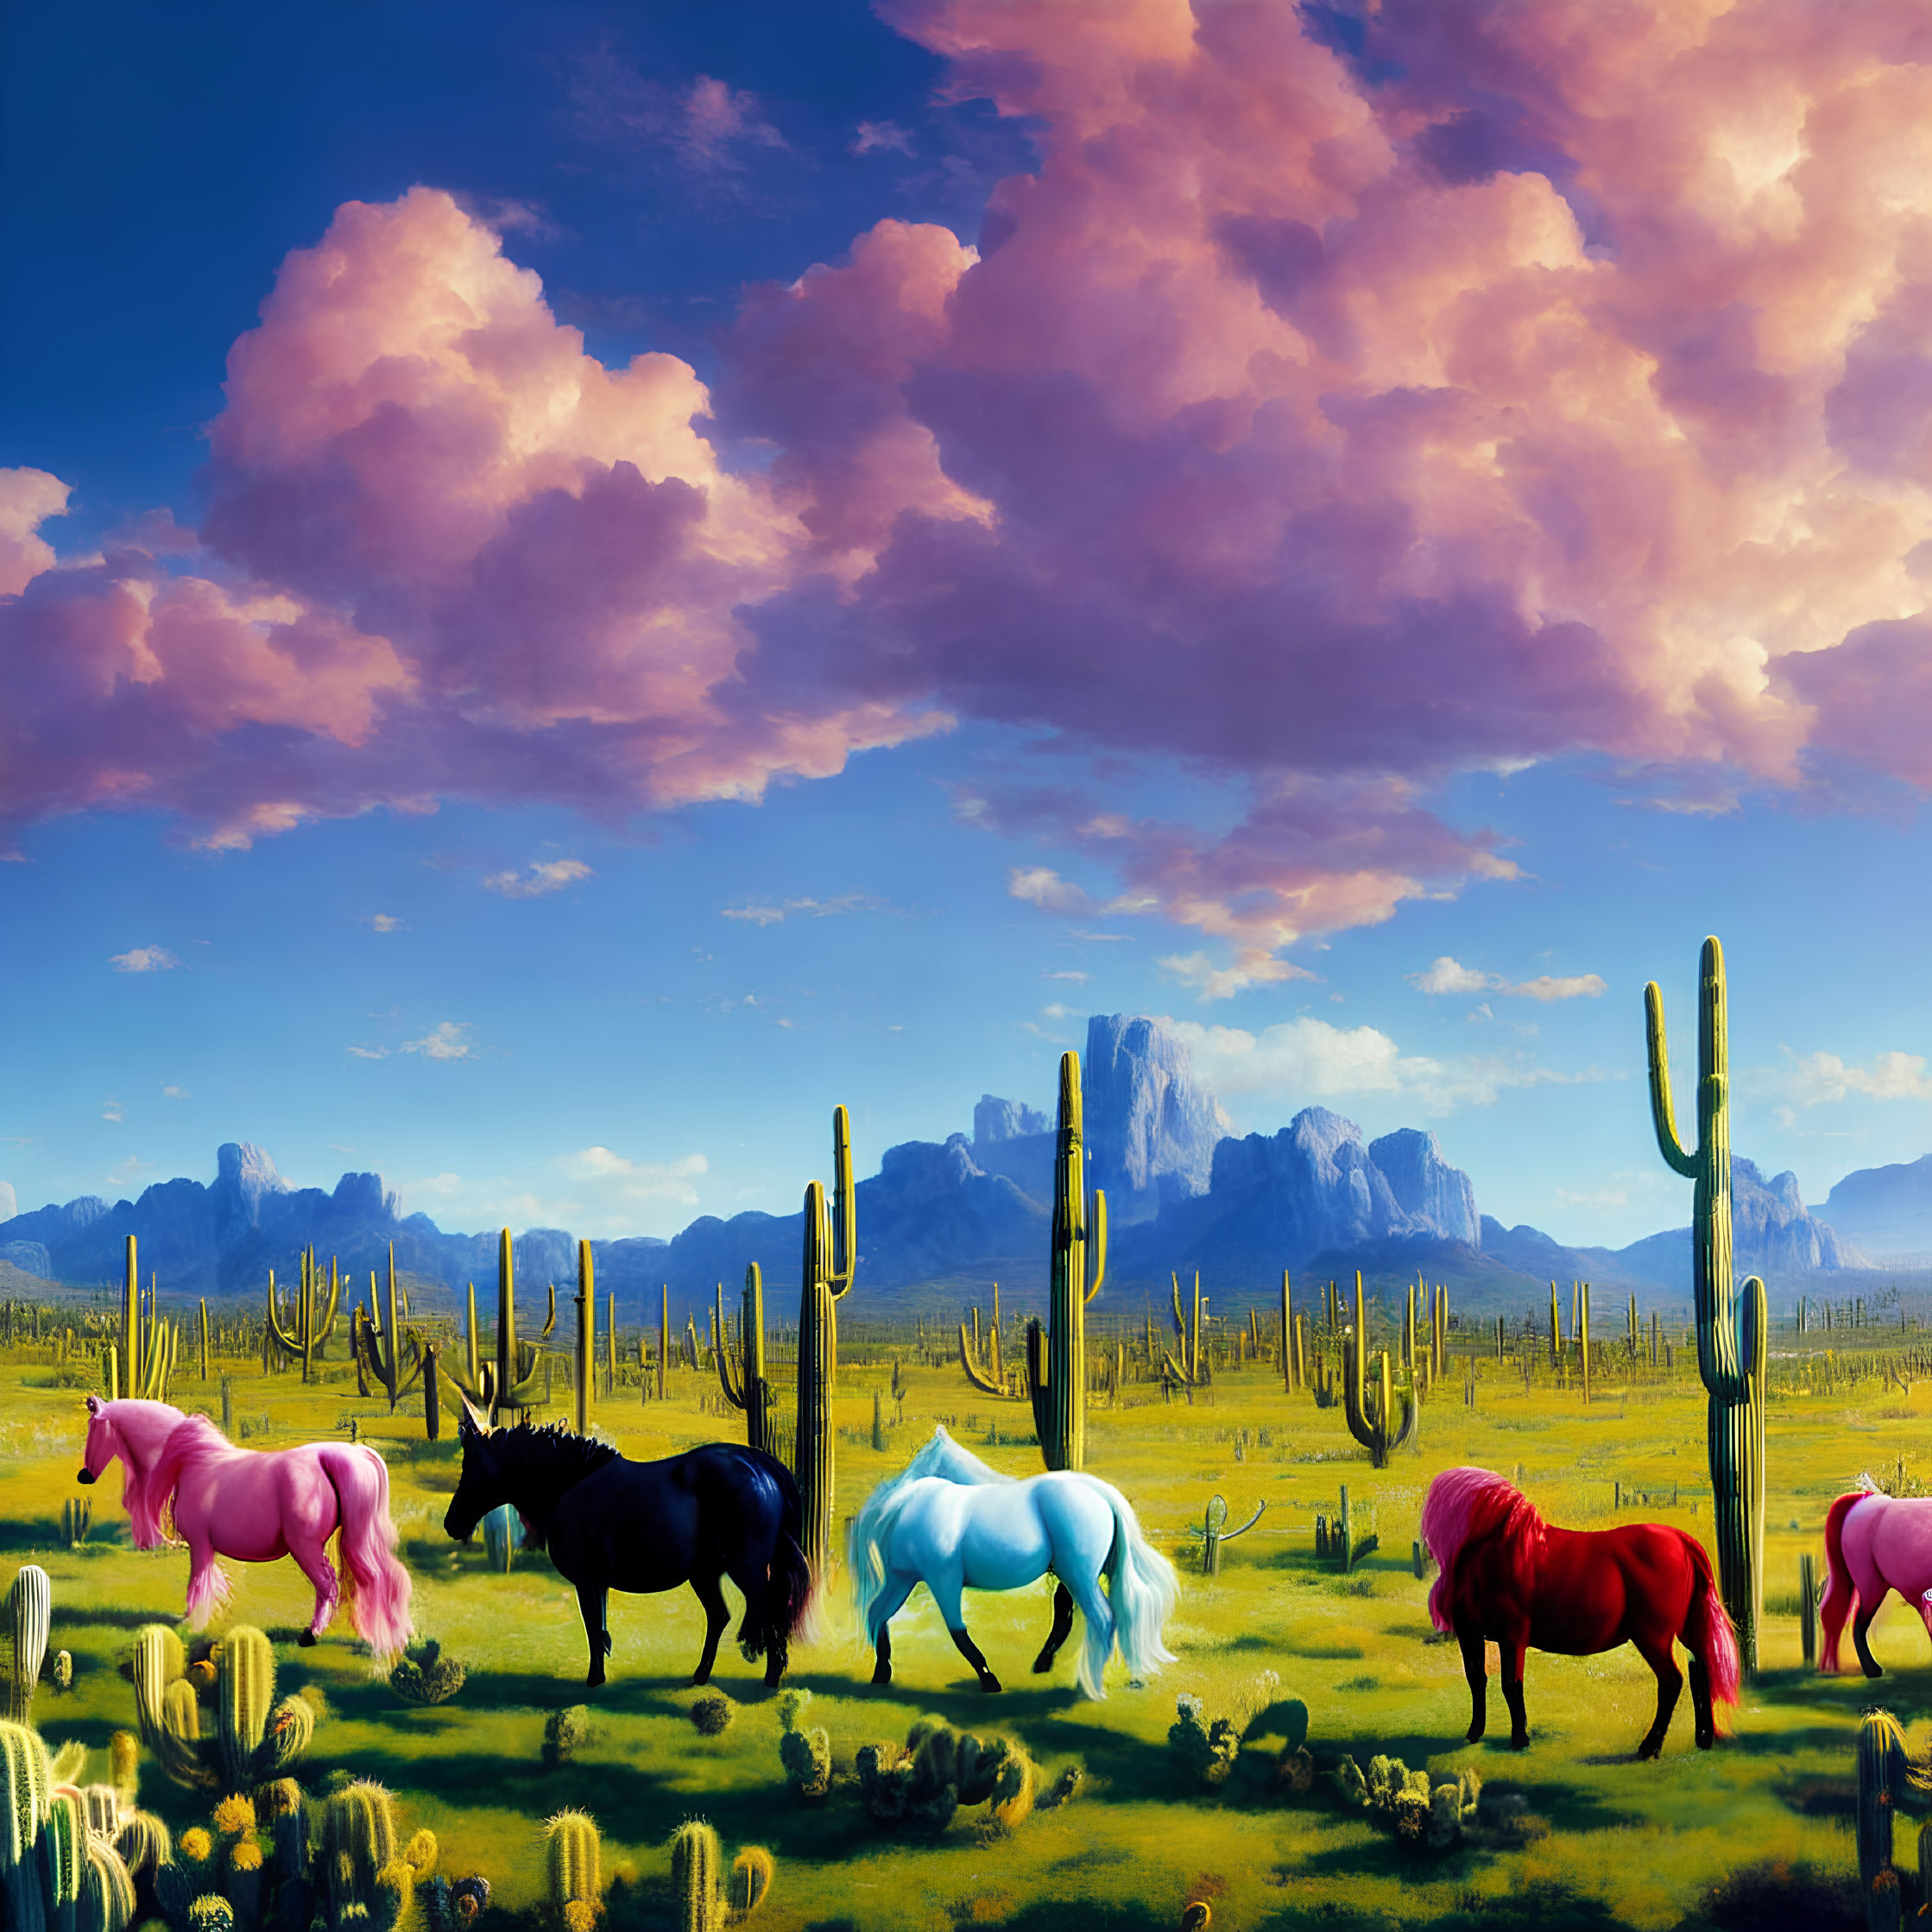 Colorful Horses Grazing Among Cacti Under Vibrant Sky